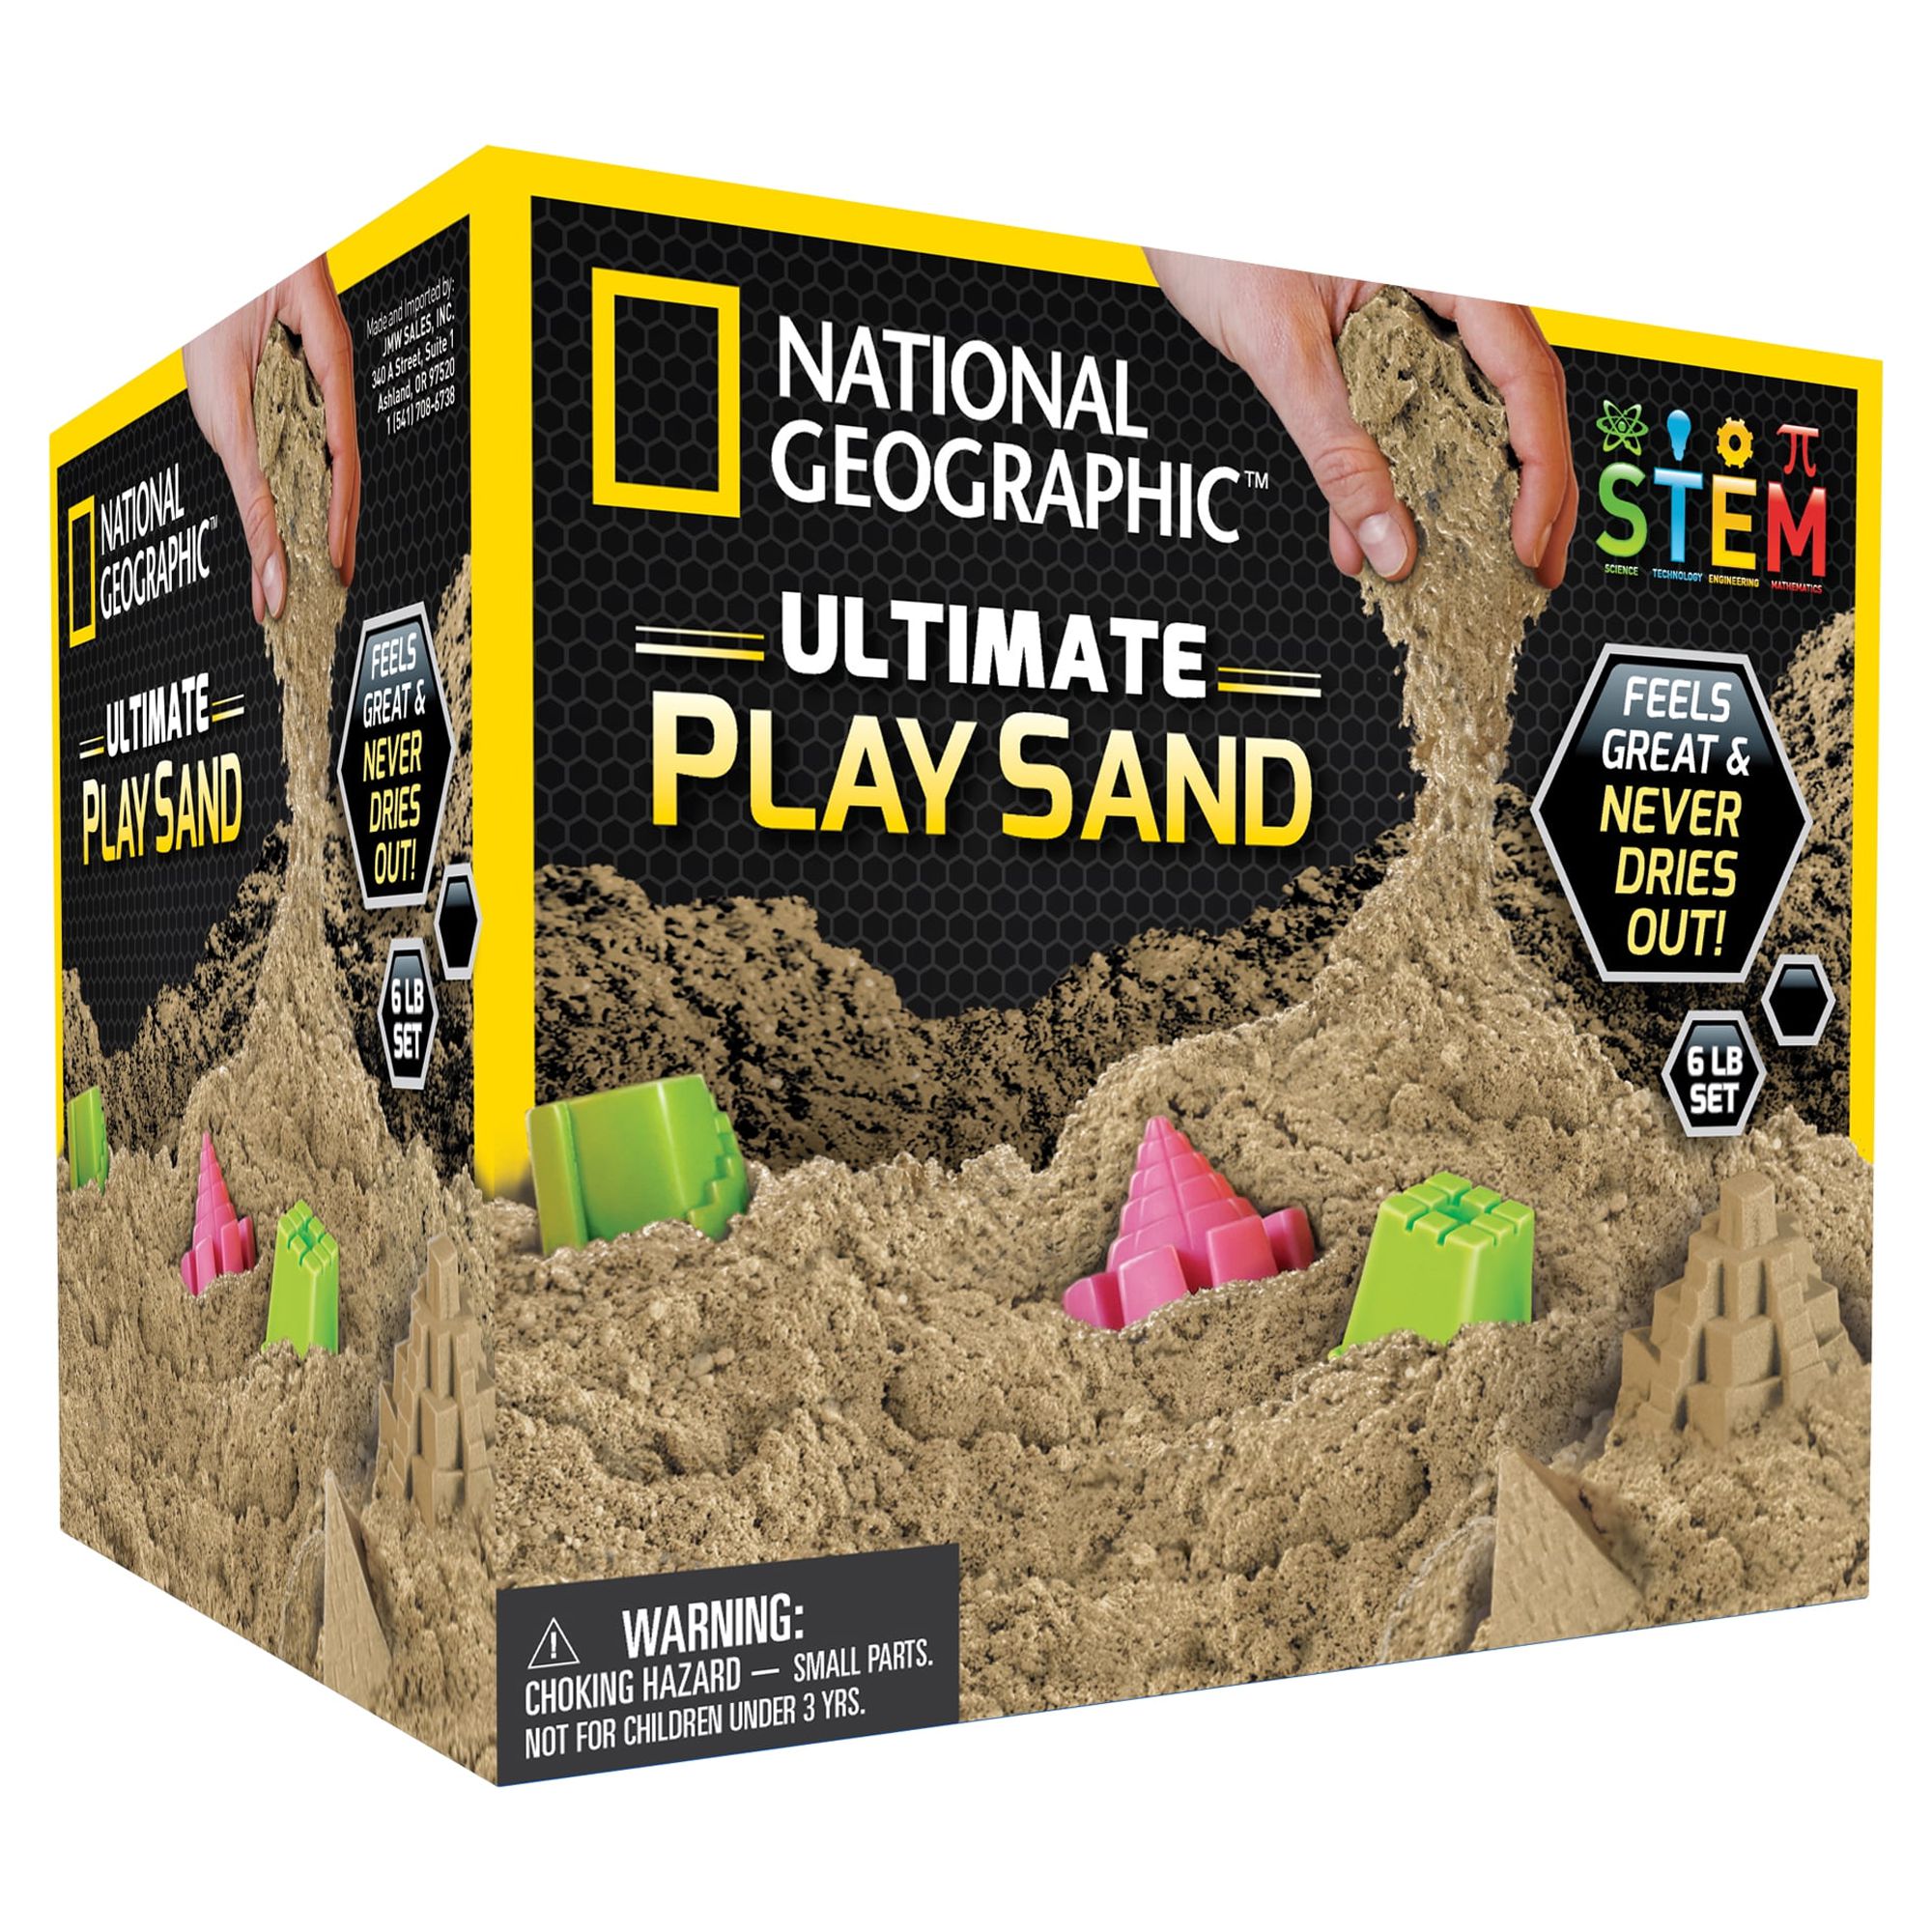 National Geographic Play Sand - 6 lbs of Sand with Castle Molds (Natural Sand color) - A Fun Sensory Sand Activity - image 4 of 7